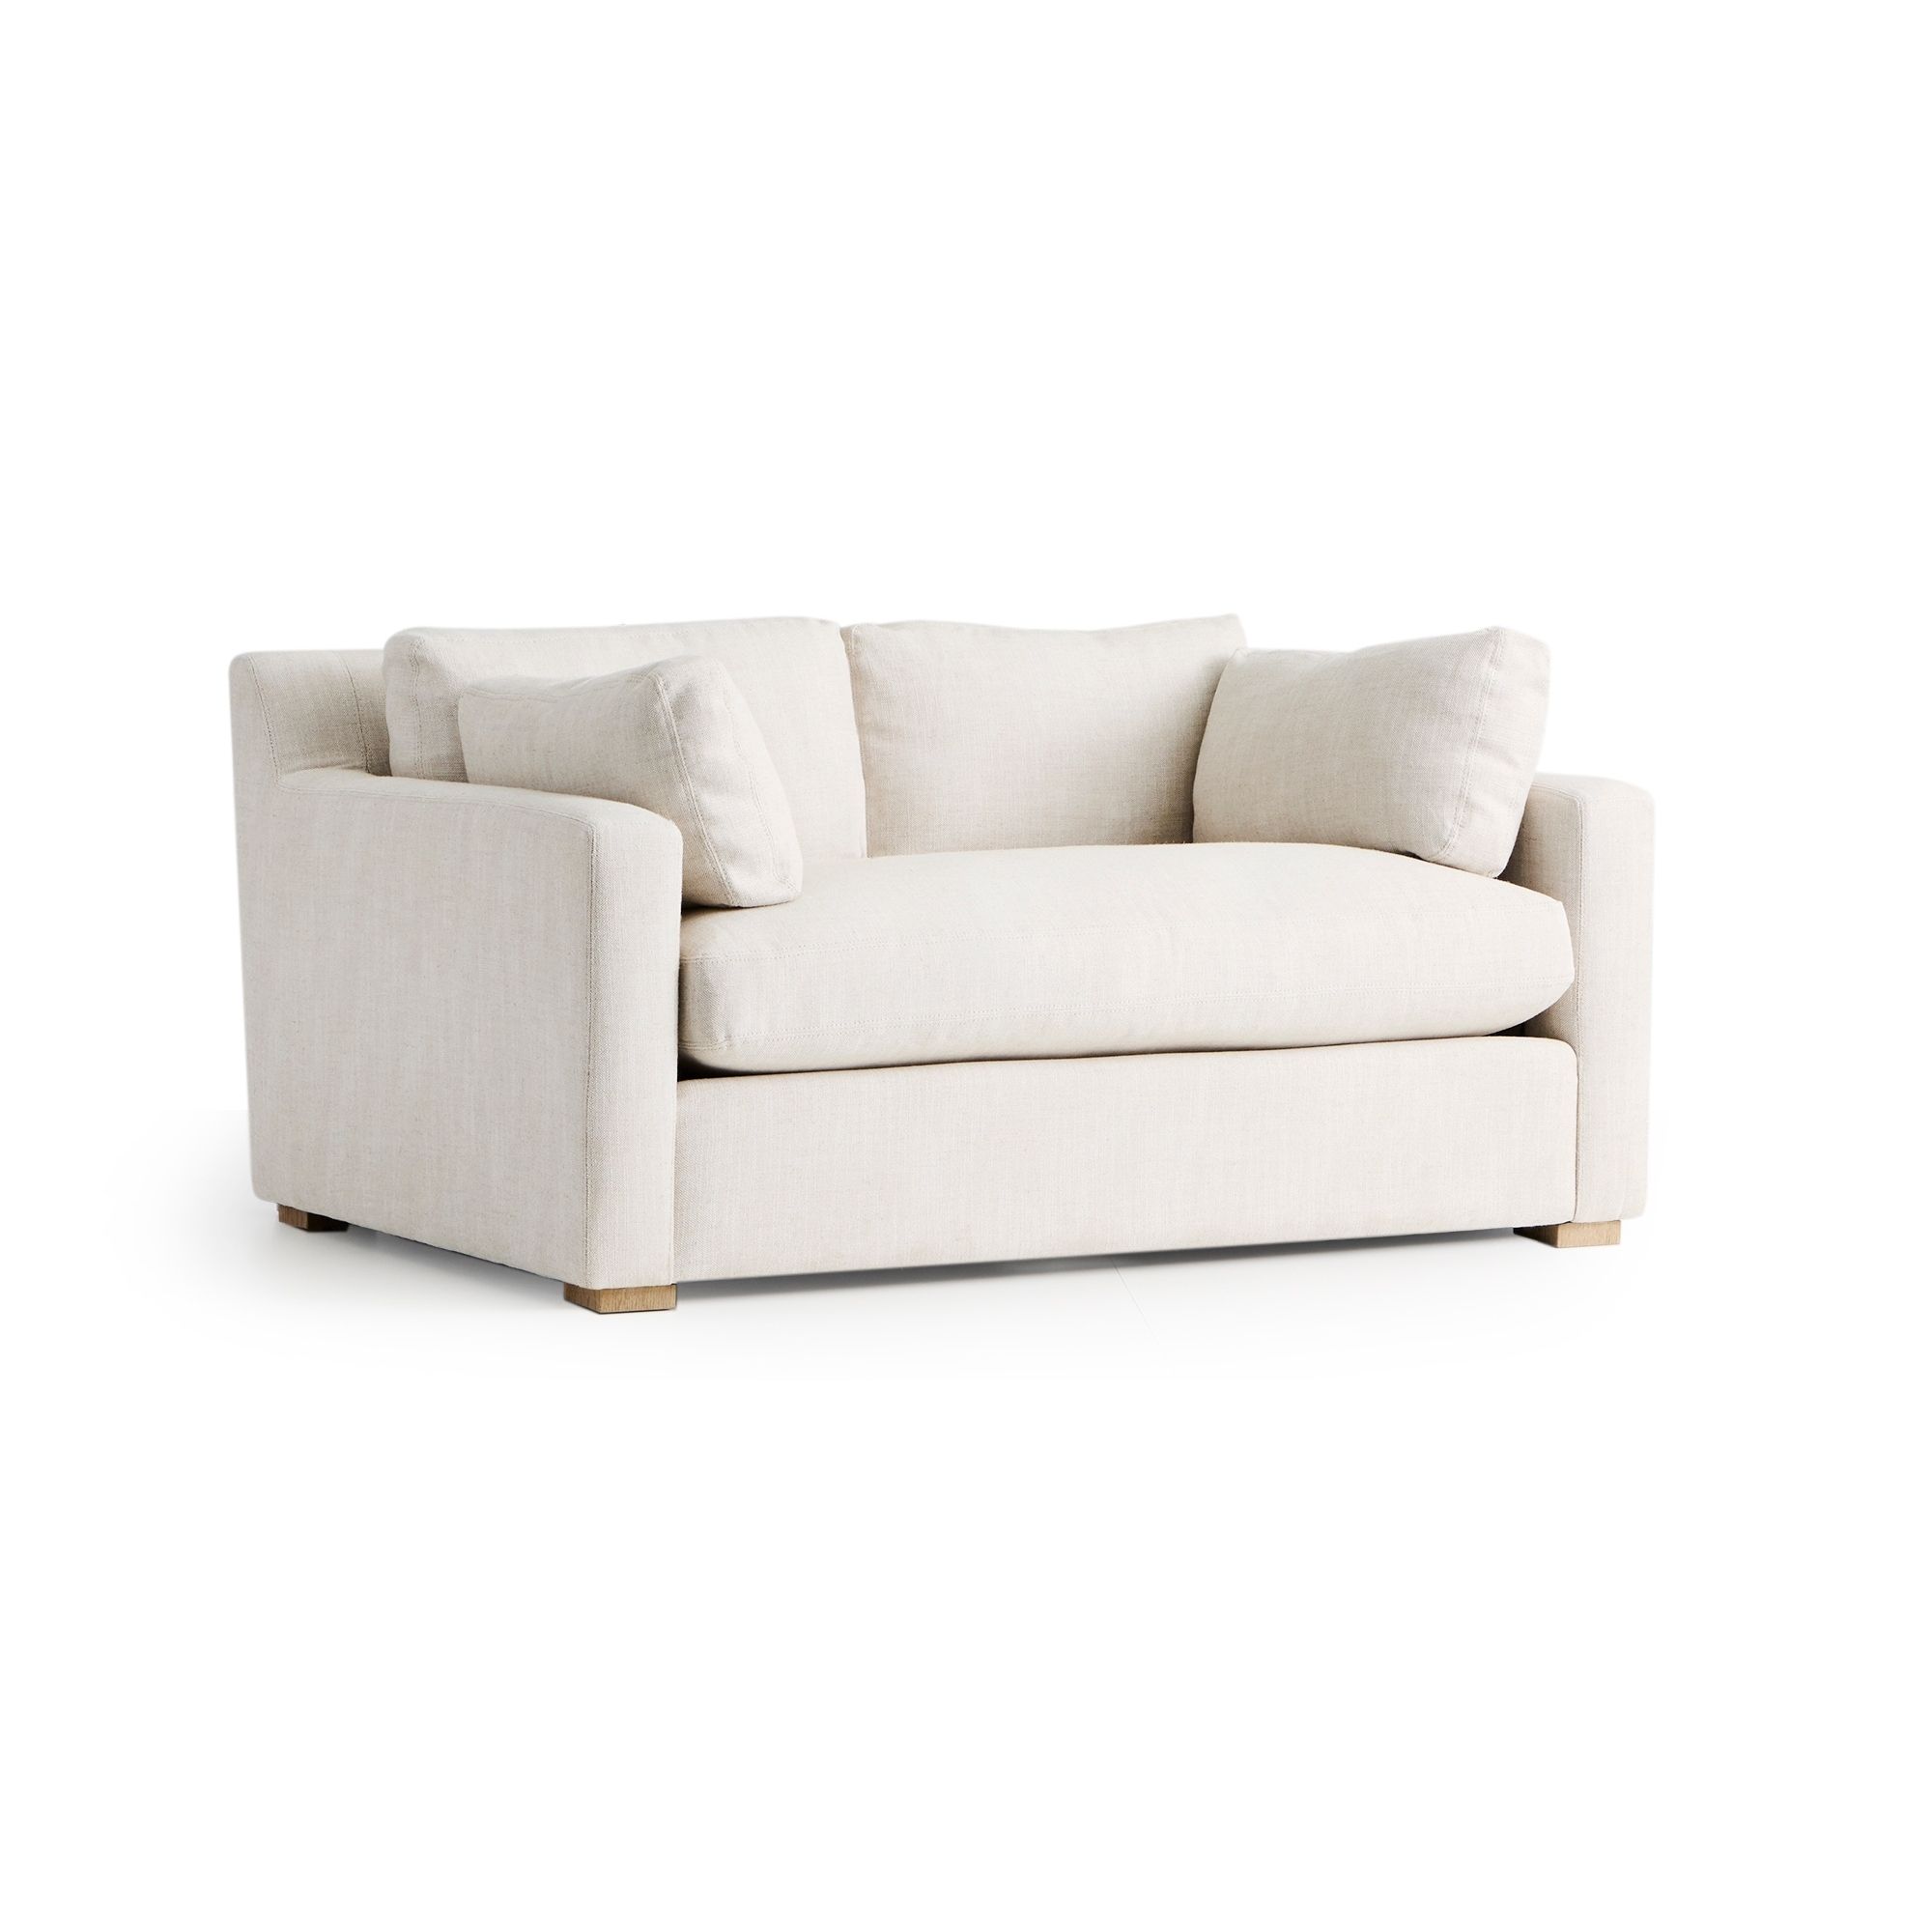 Reasons you should make purchase of the
  comfortable loveseat online